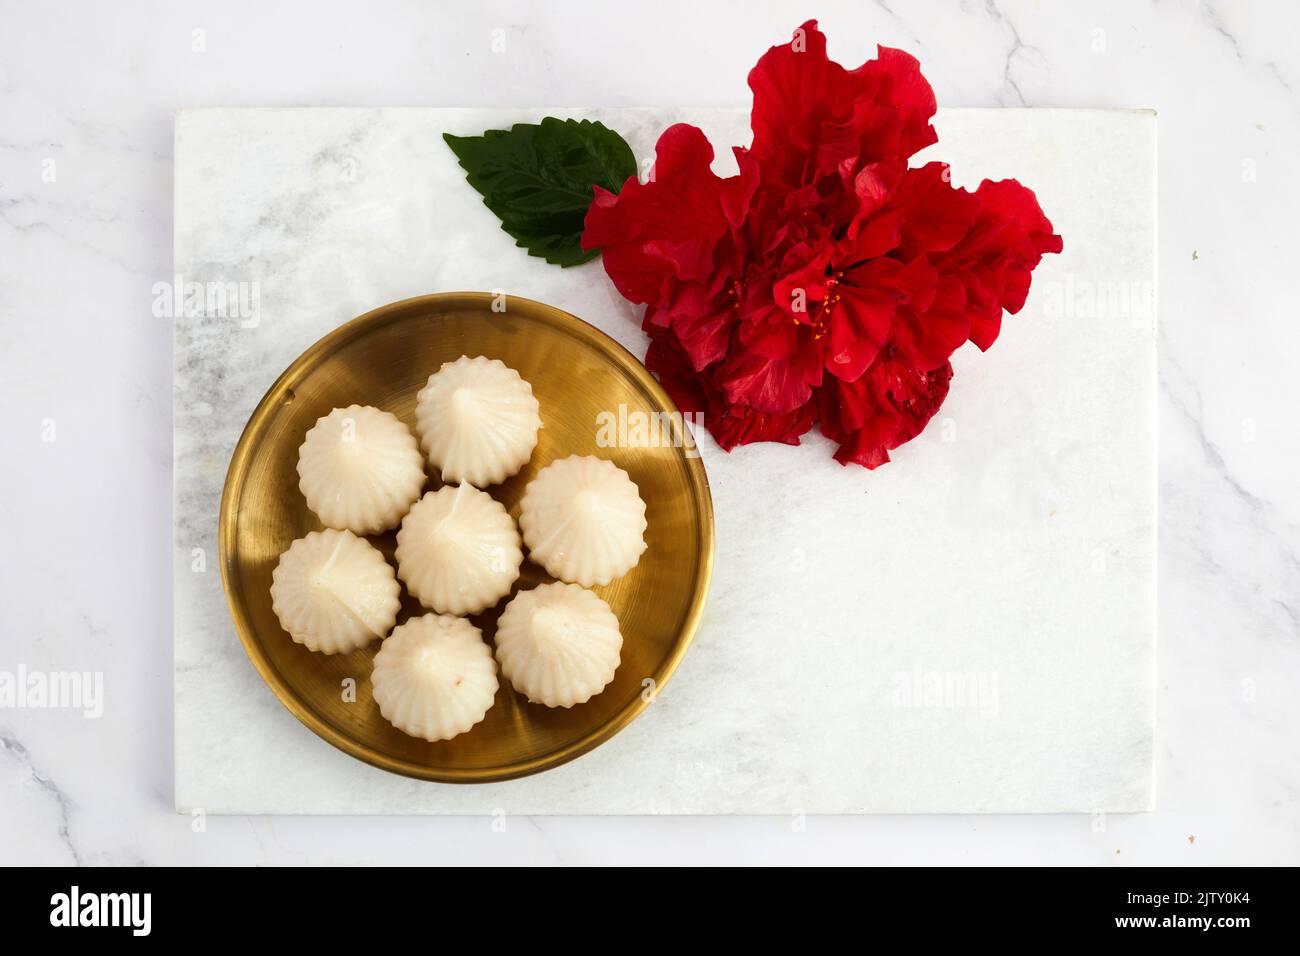 Steamed or ukdiche Modak. Offered to Lord Ganesha during Ganpati festival in India. Stock Photo